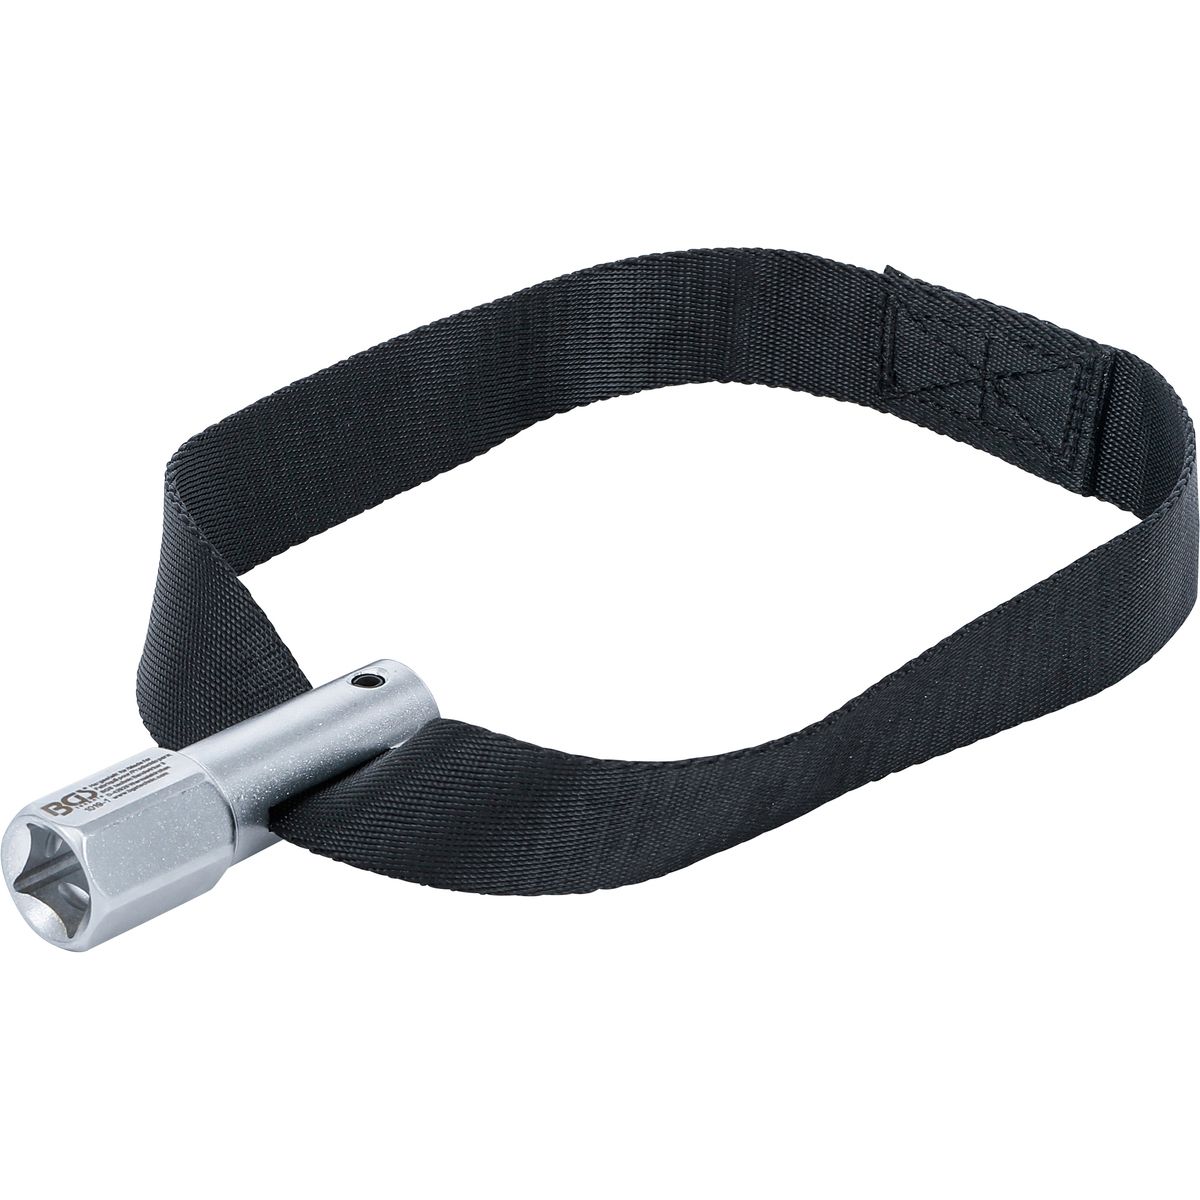 Oil Filter Strap Wrench | Ø max. 160 mm